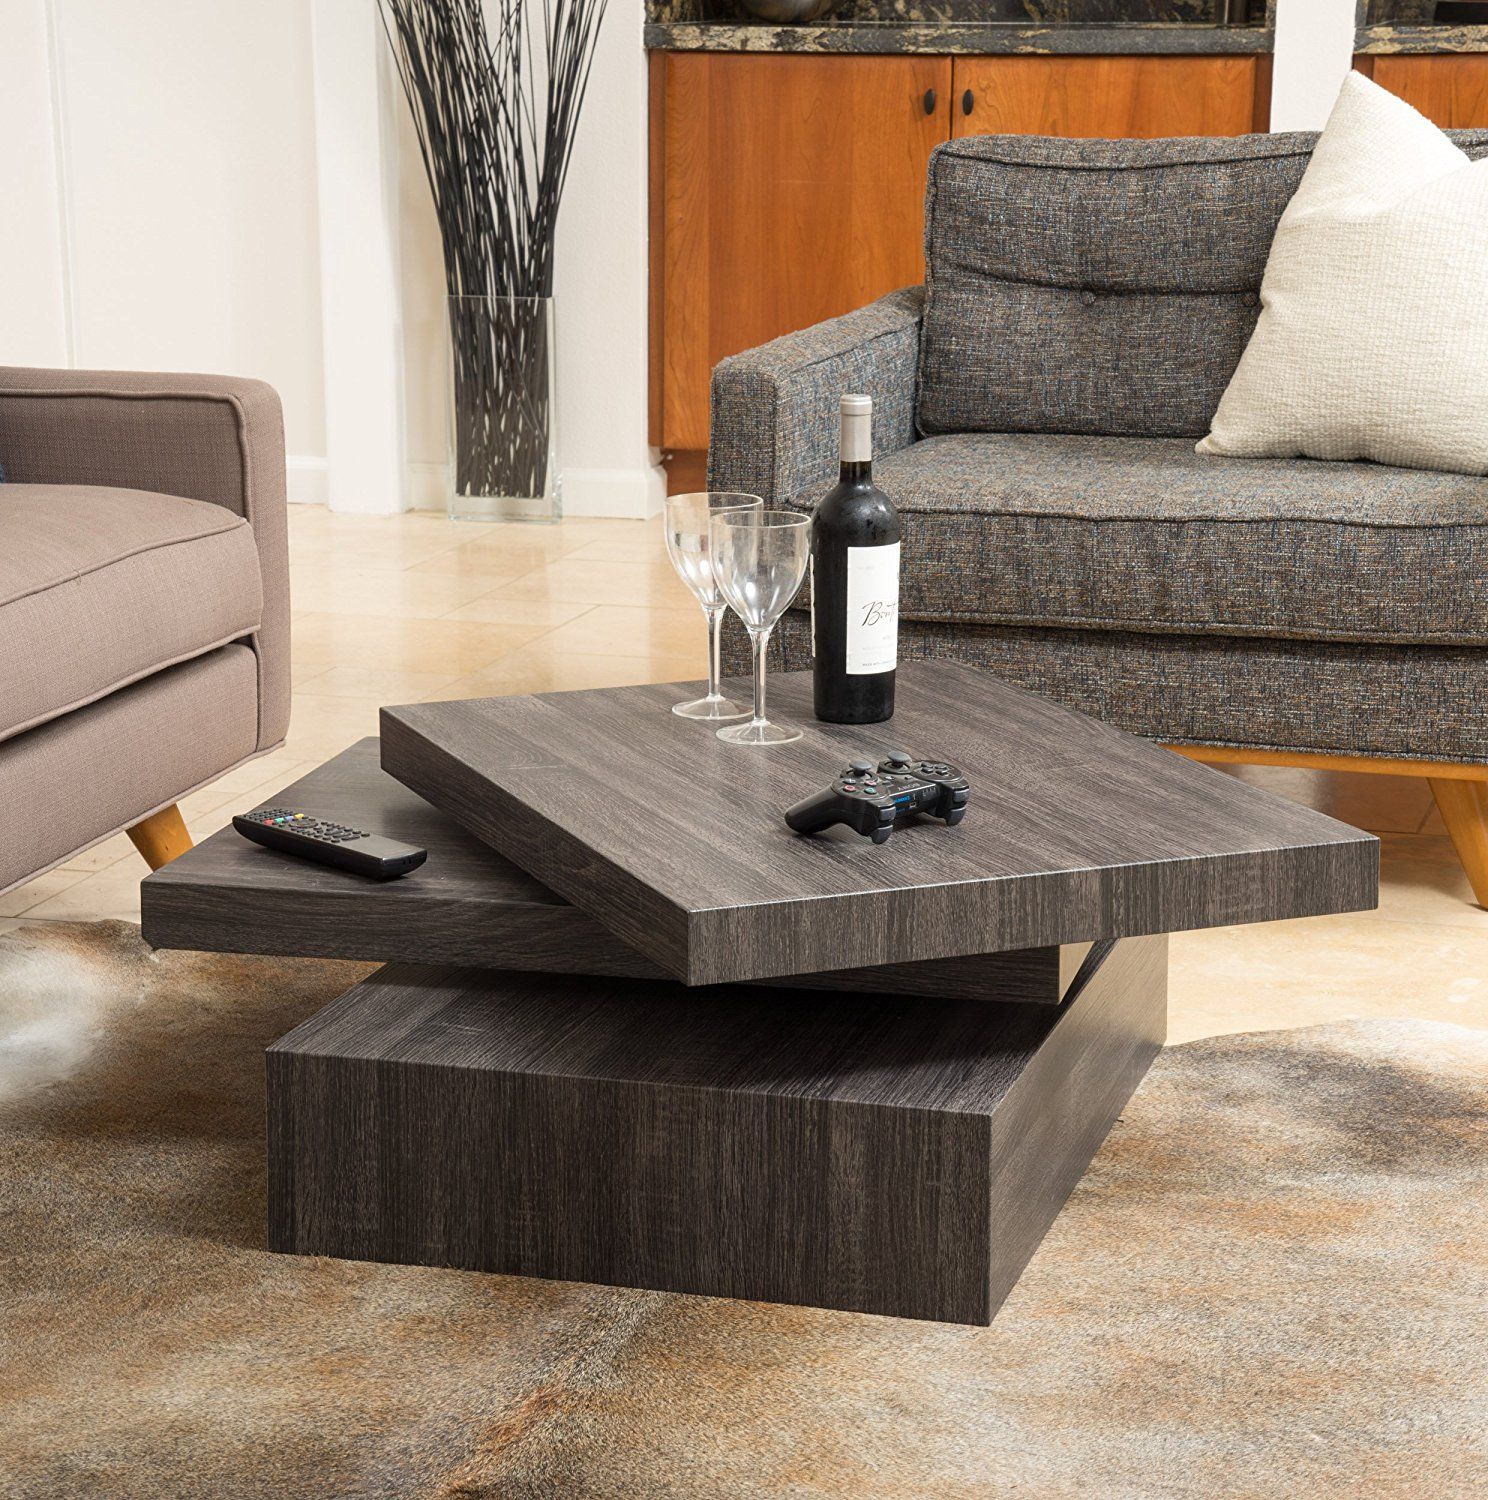 Popular 30 Thinks We Can Learn From This Living Room Coffee Table – Home Intended For Simple Design Coffee Tables (View 13 of 15)